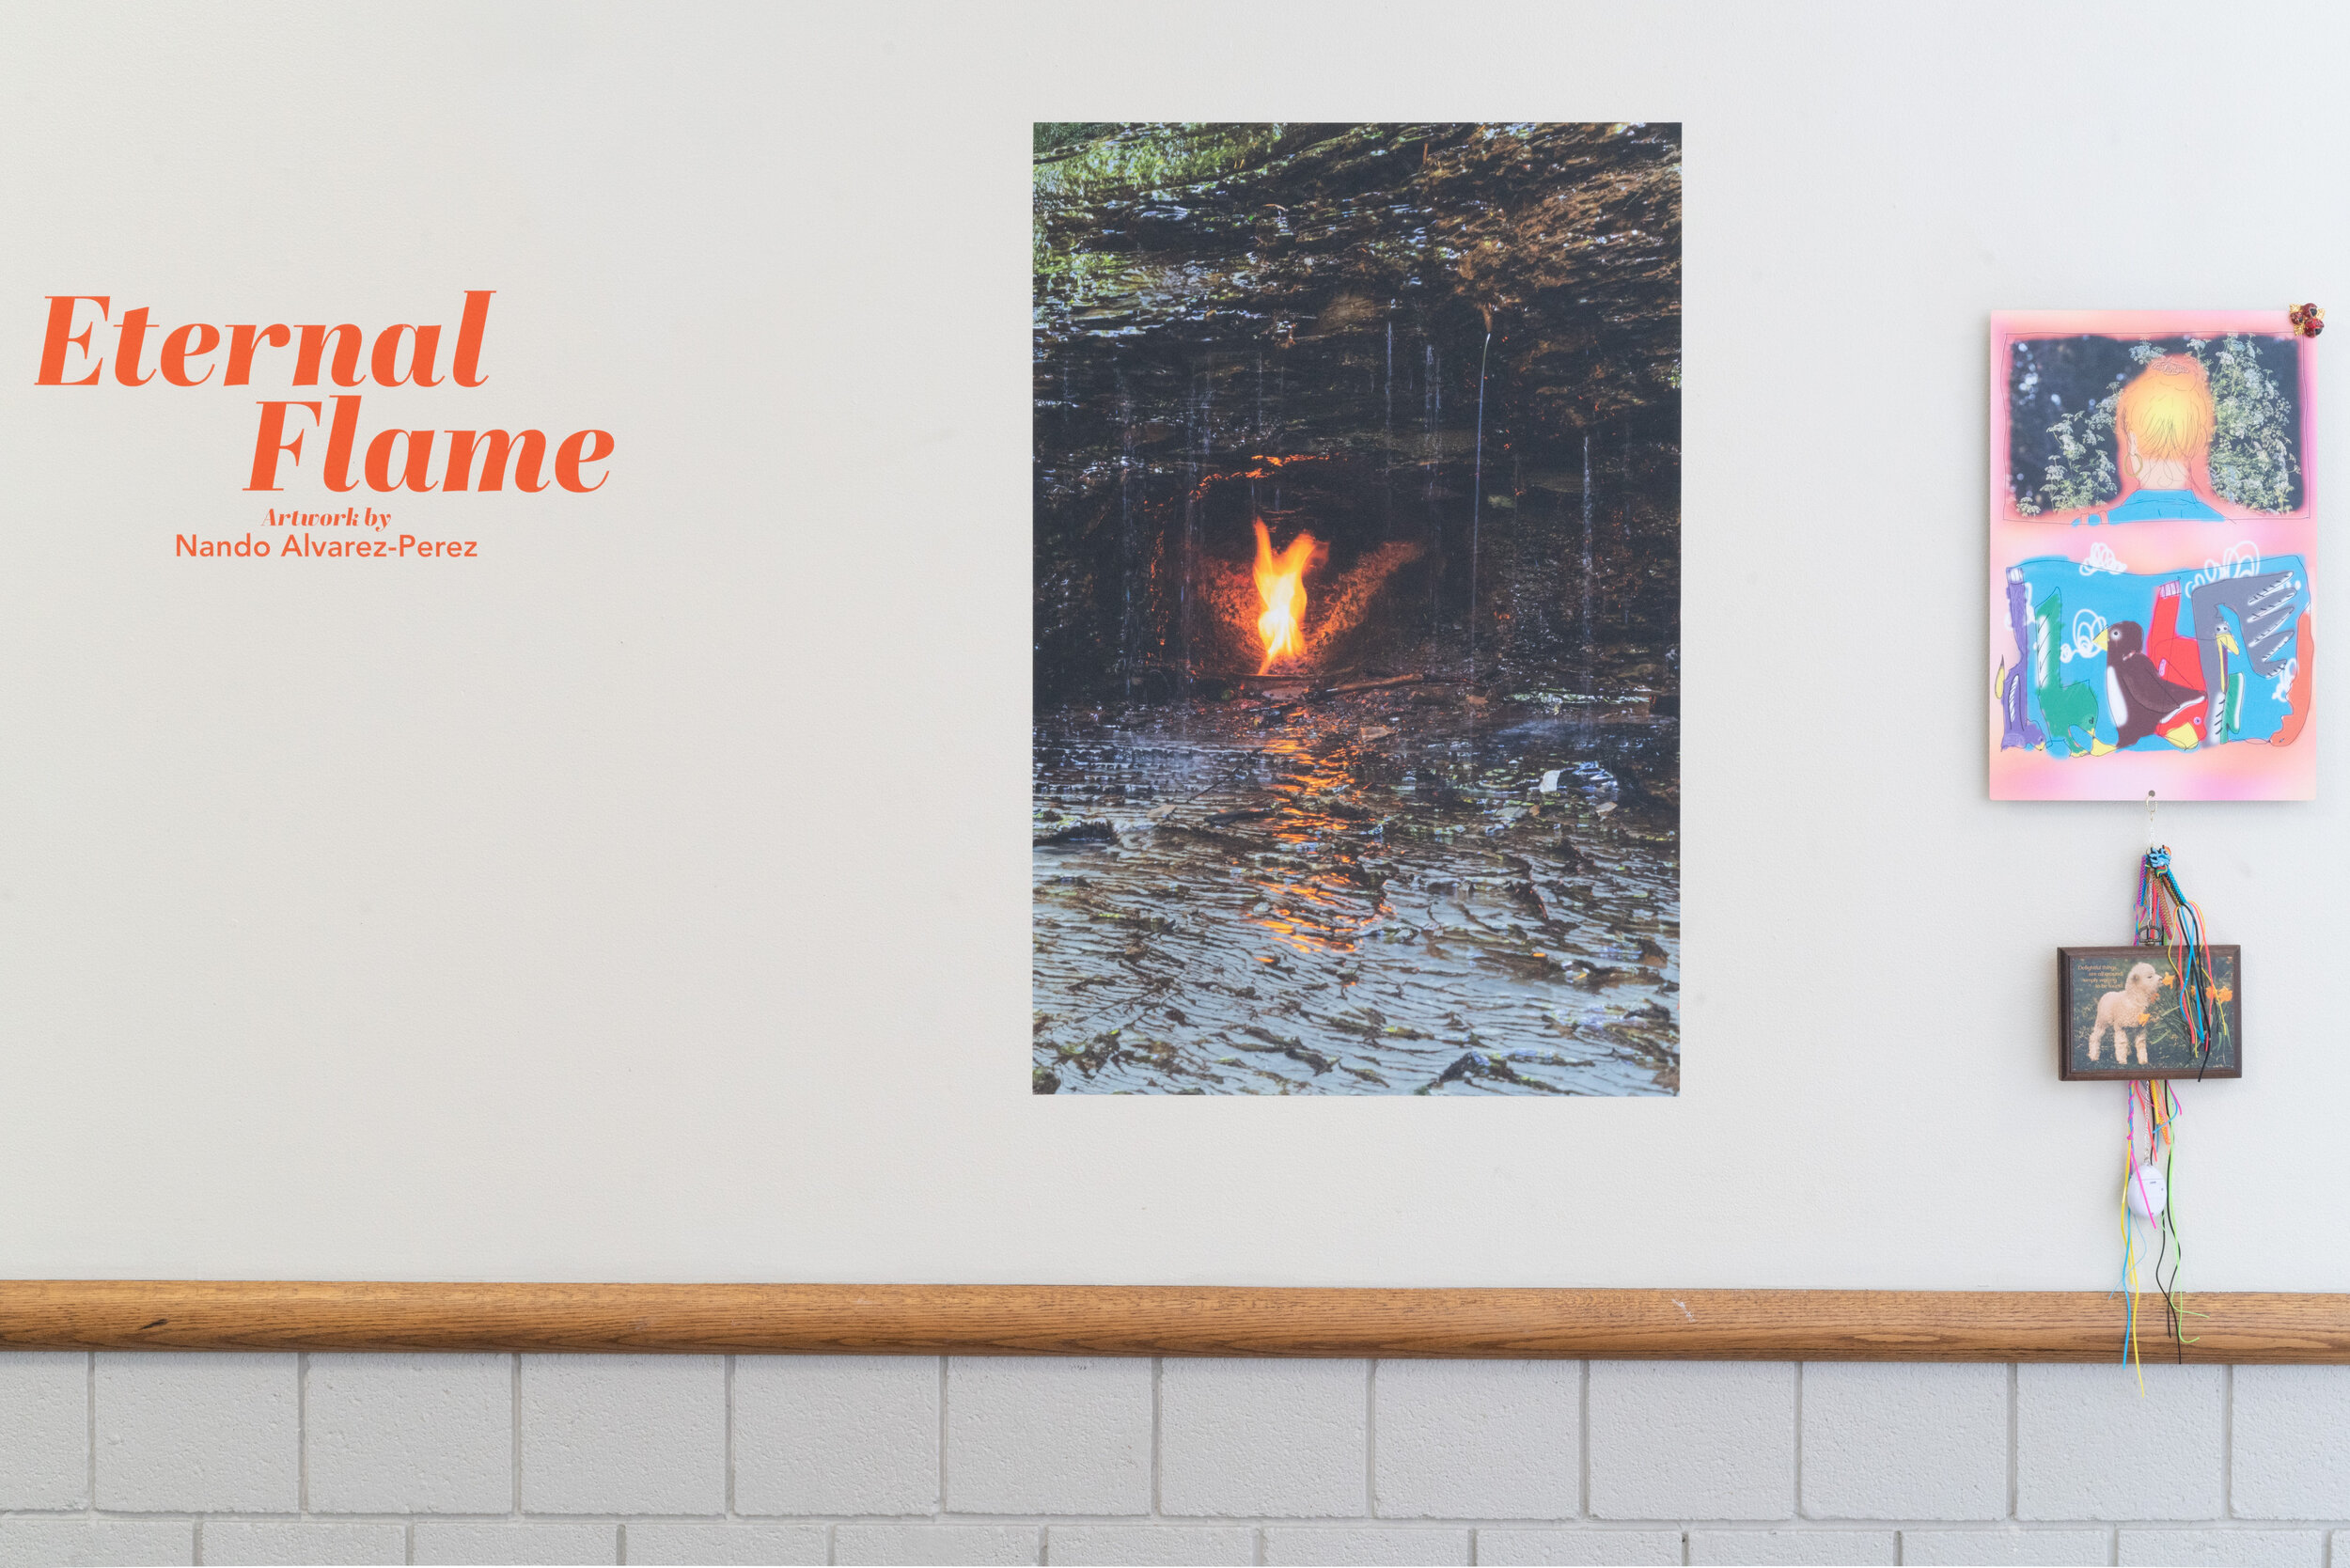 Installation view: (L) Eternal Flame, (R) Emily and the Animals